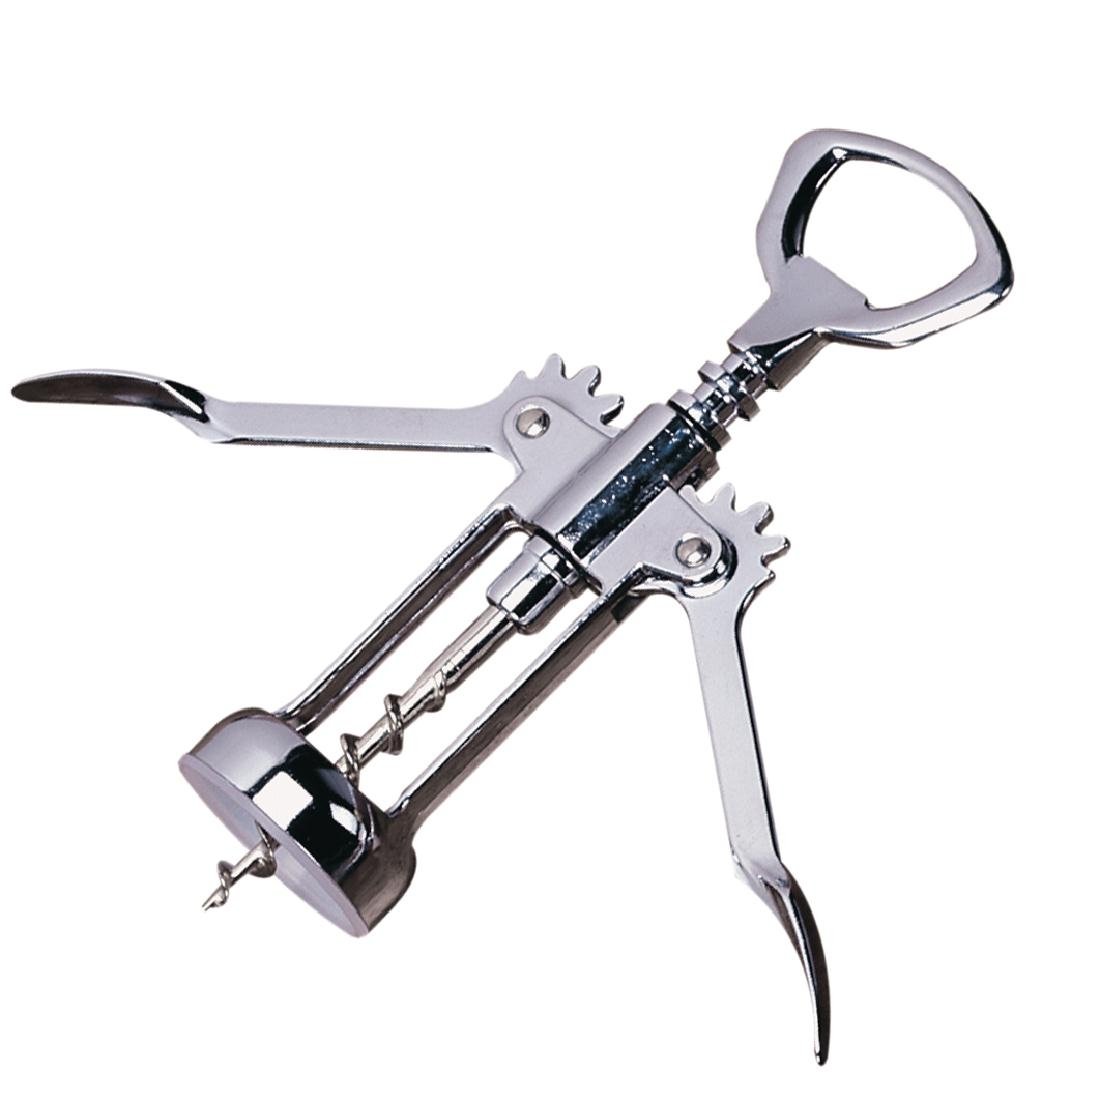 Winged Bottle Opener and Corkscrew